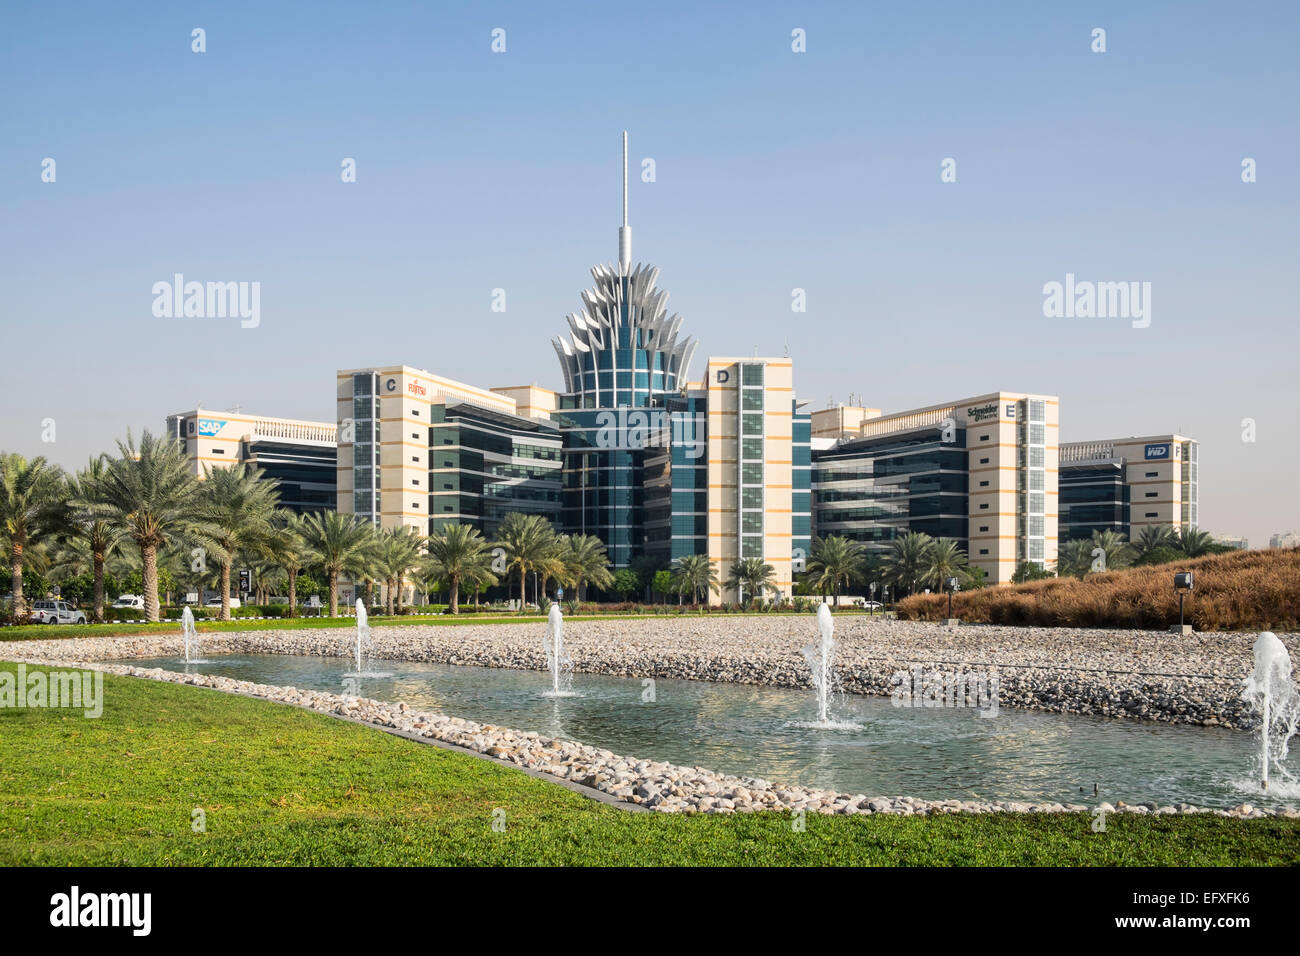 Pineapple building at Silicon Oasis Business Park in Dubai united Arab Emirates Stock Photo